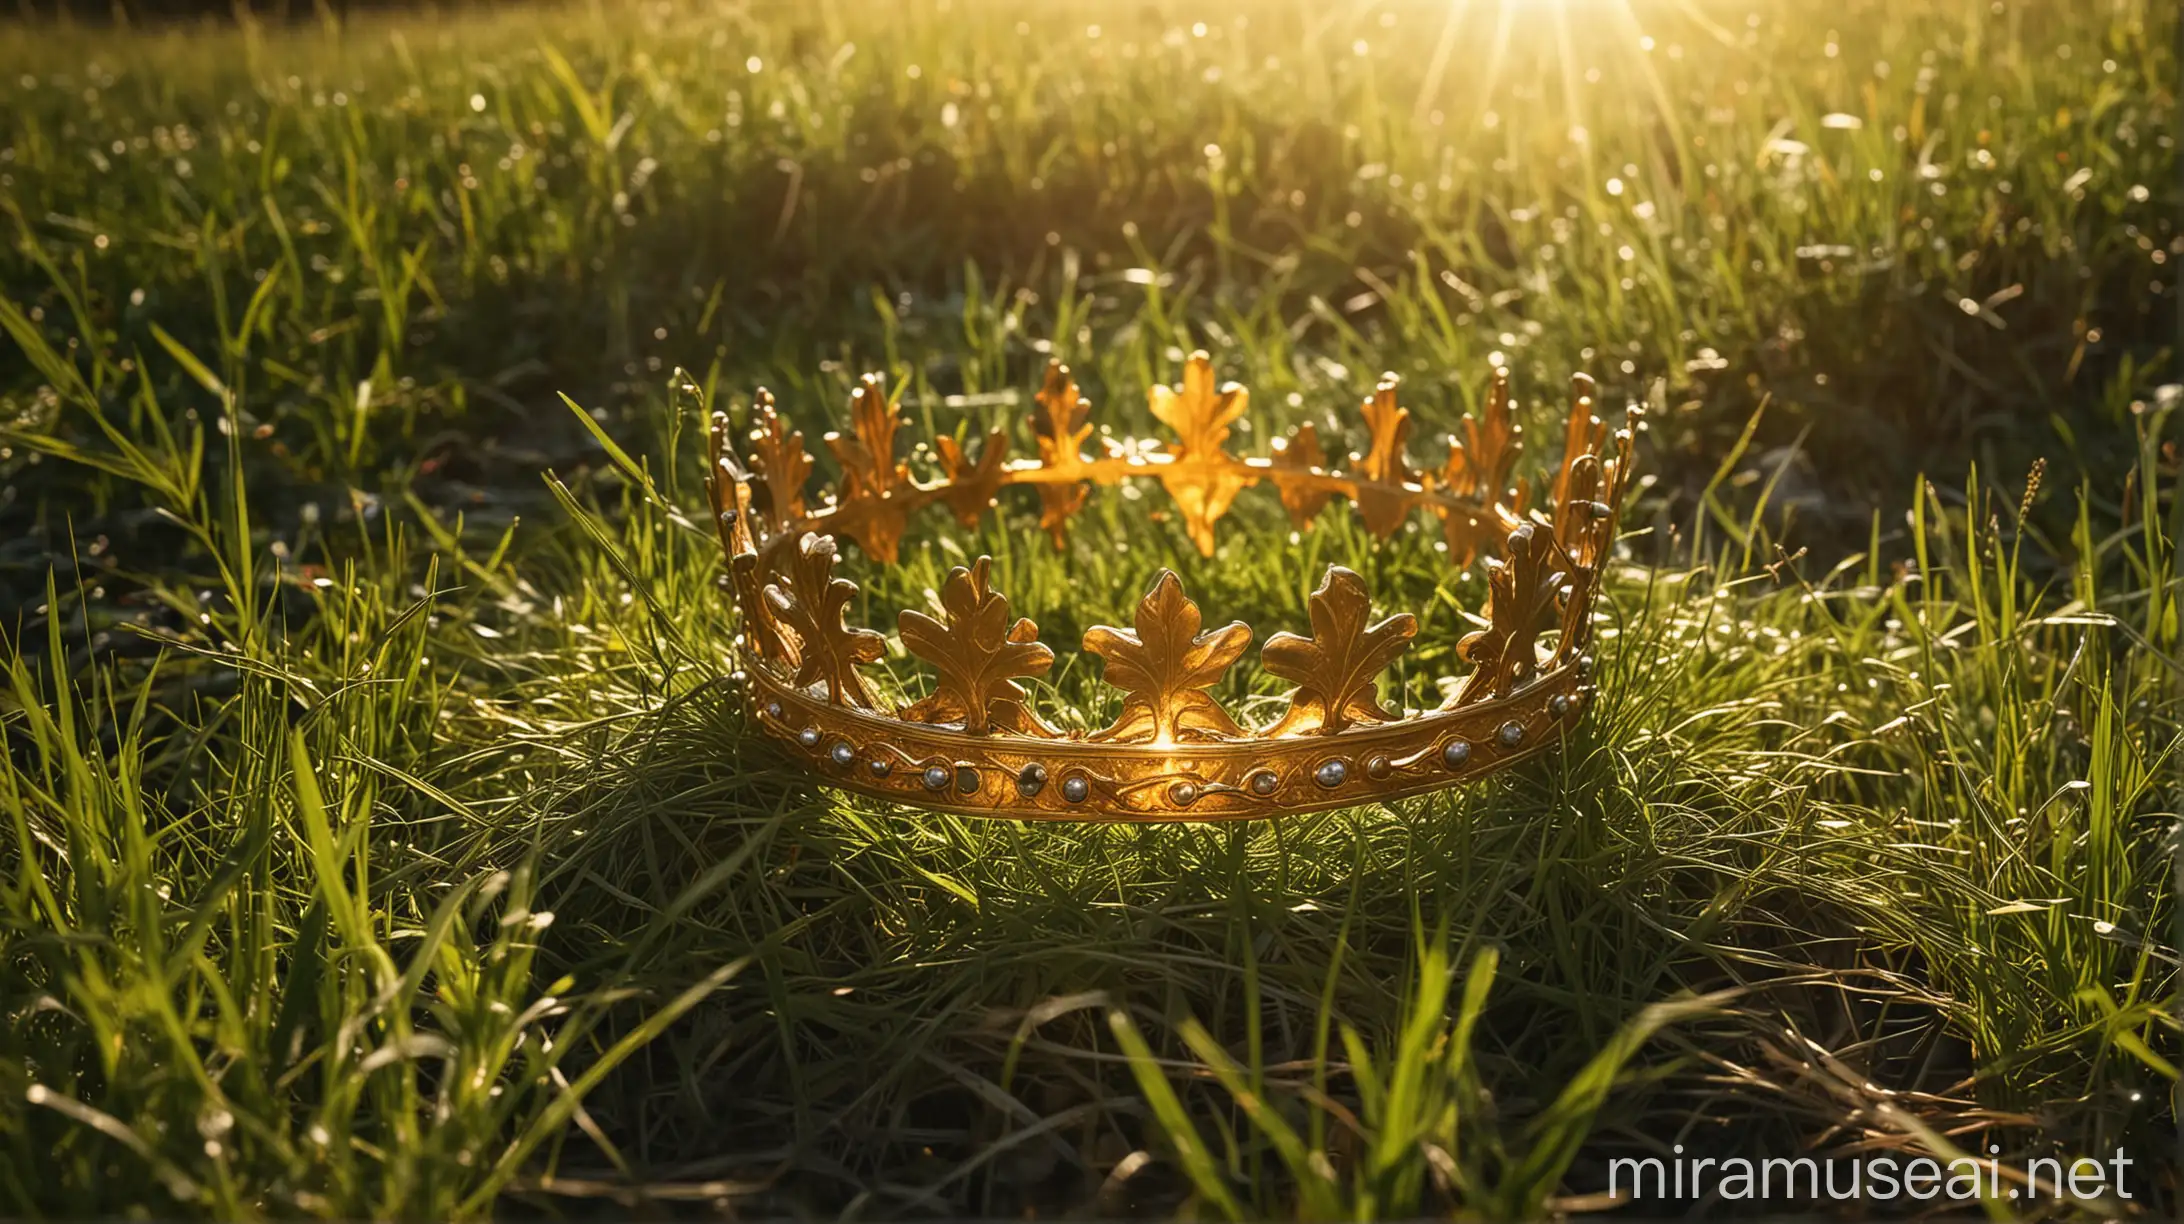 Golden Crown Lying in Sunlit Grass Royal Treasure Discovery